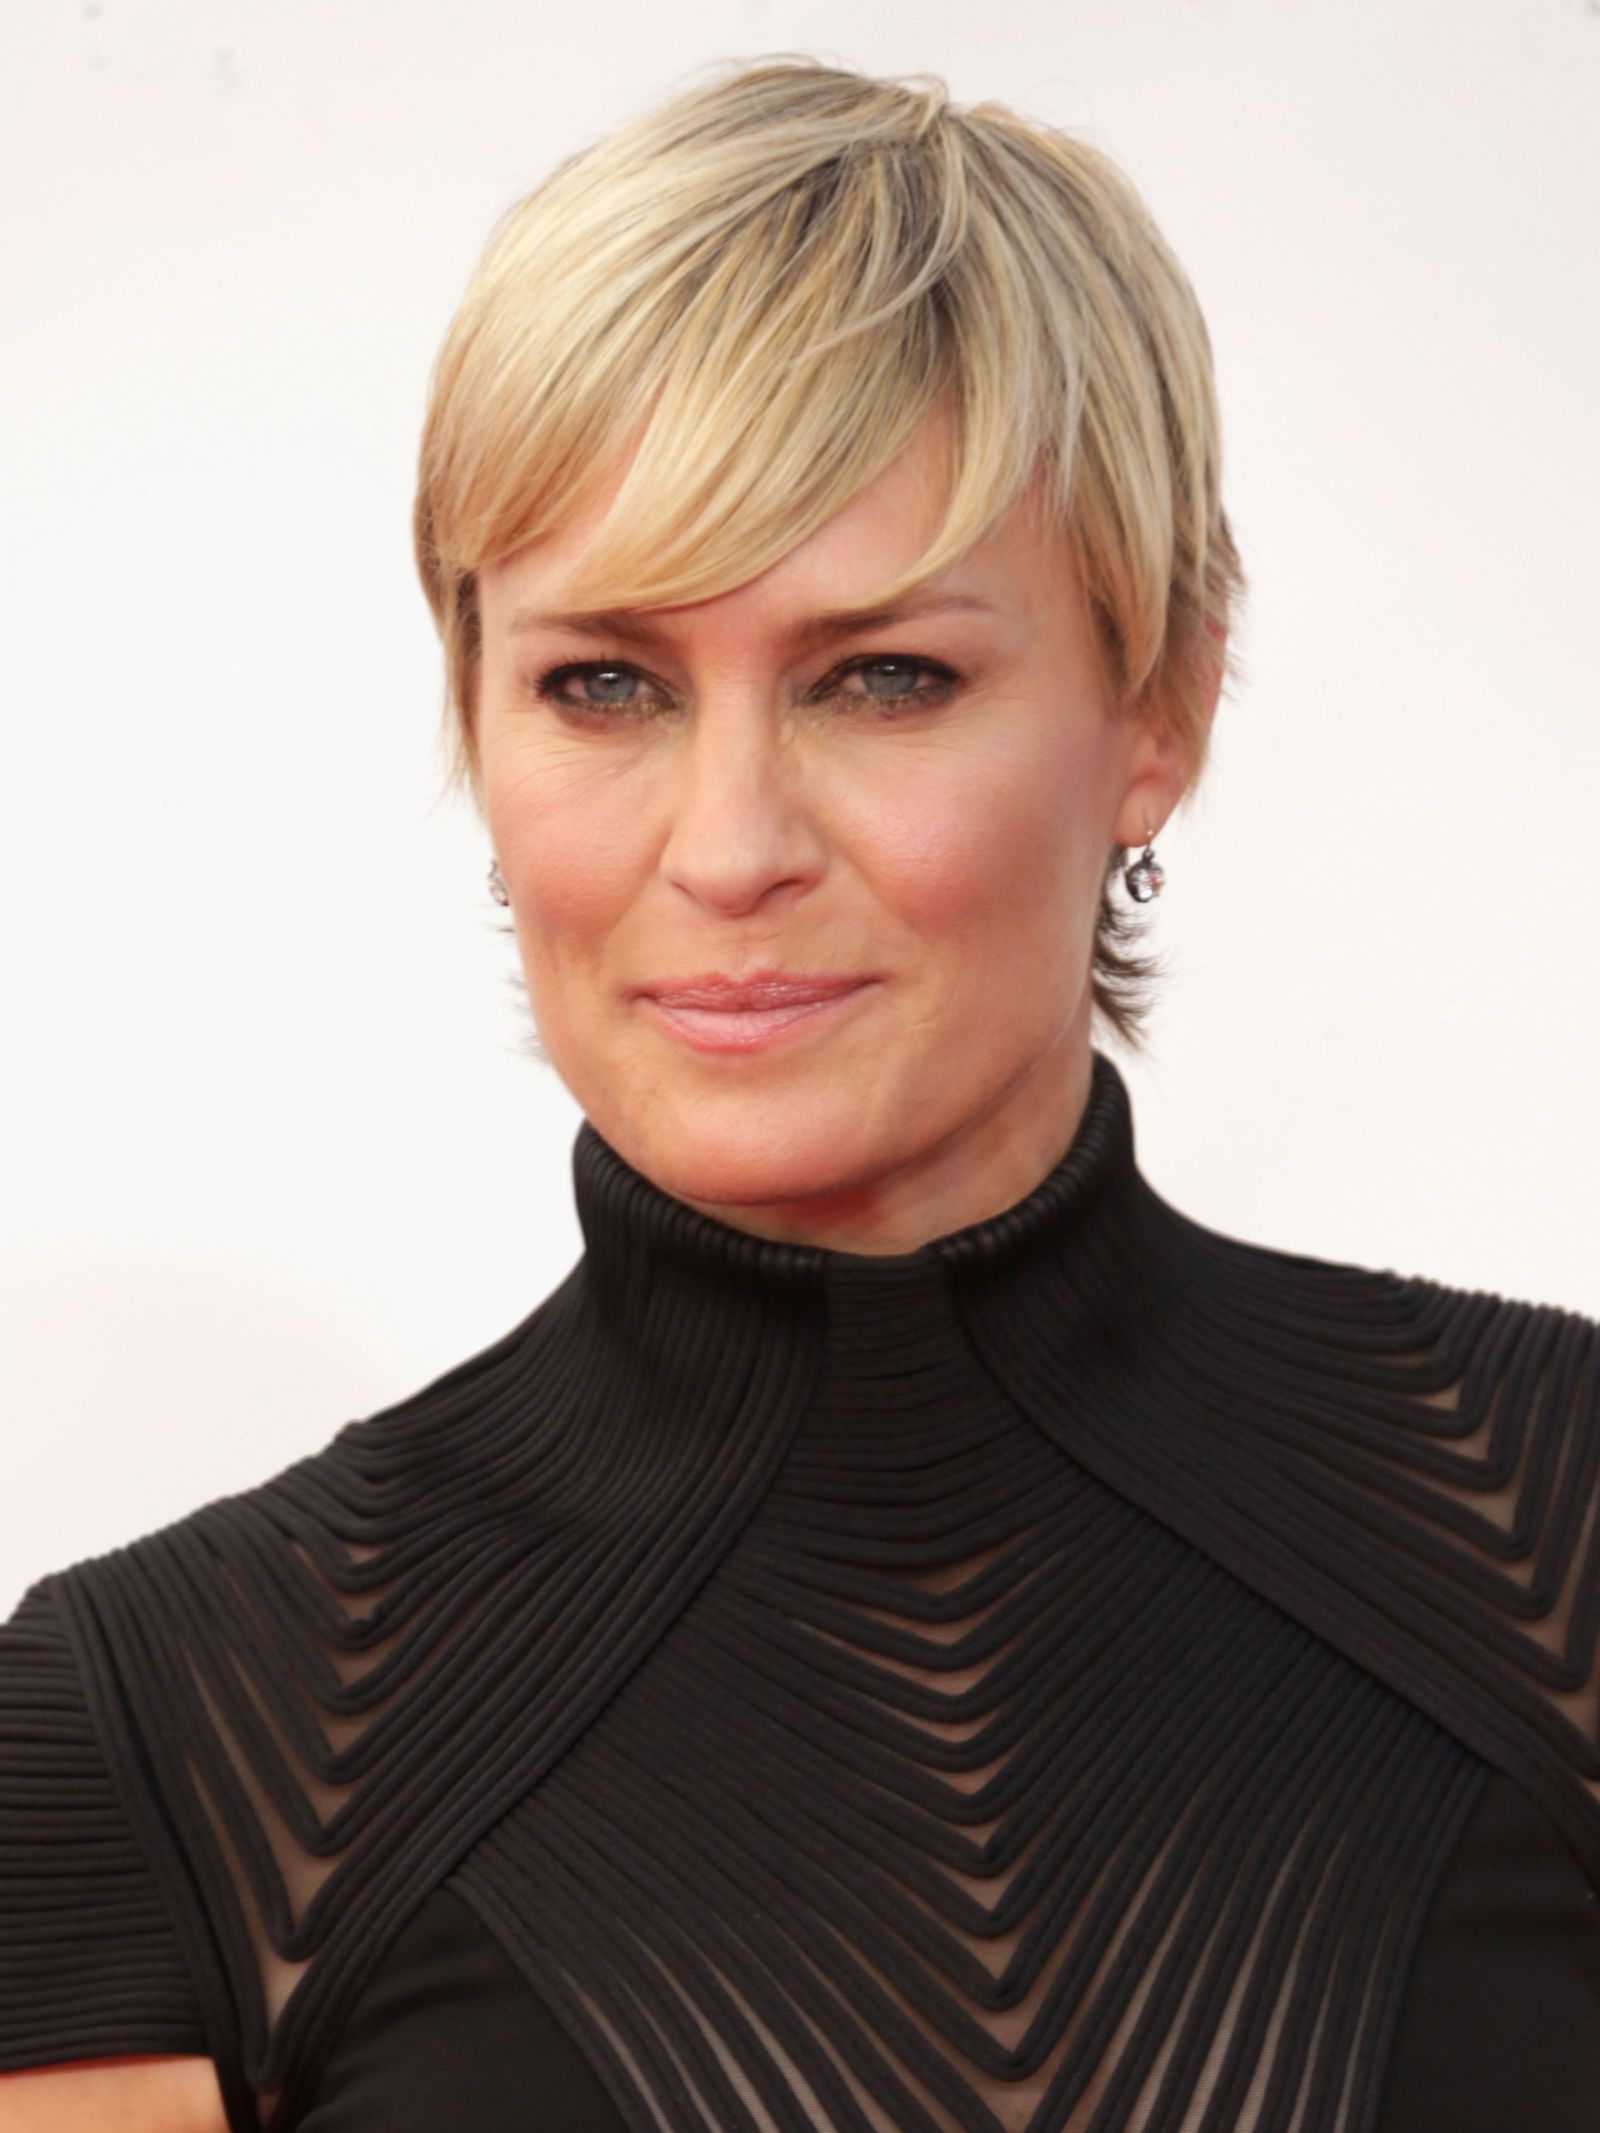 Robin Wright Haircut Tutorial - what hairstyle is best for me